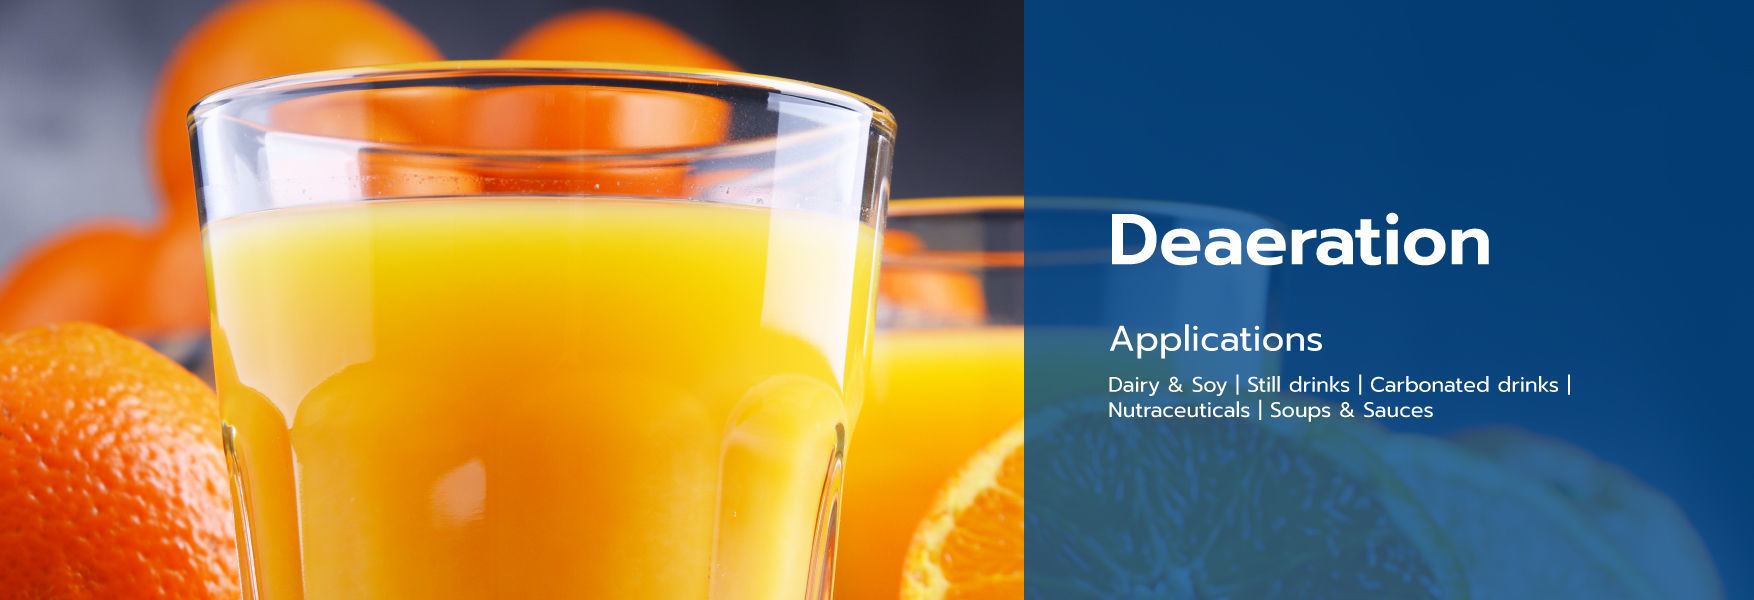 Deaeration Applications  Dairy & Soy | Still drinks | Carbonated drinks | Nutraceuticals | Soups & S